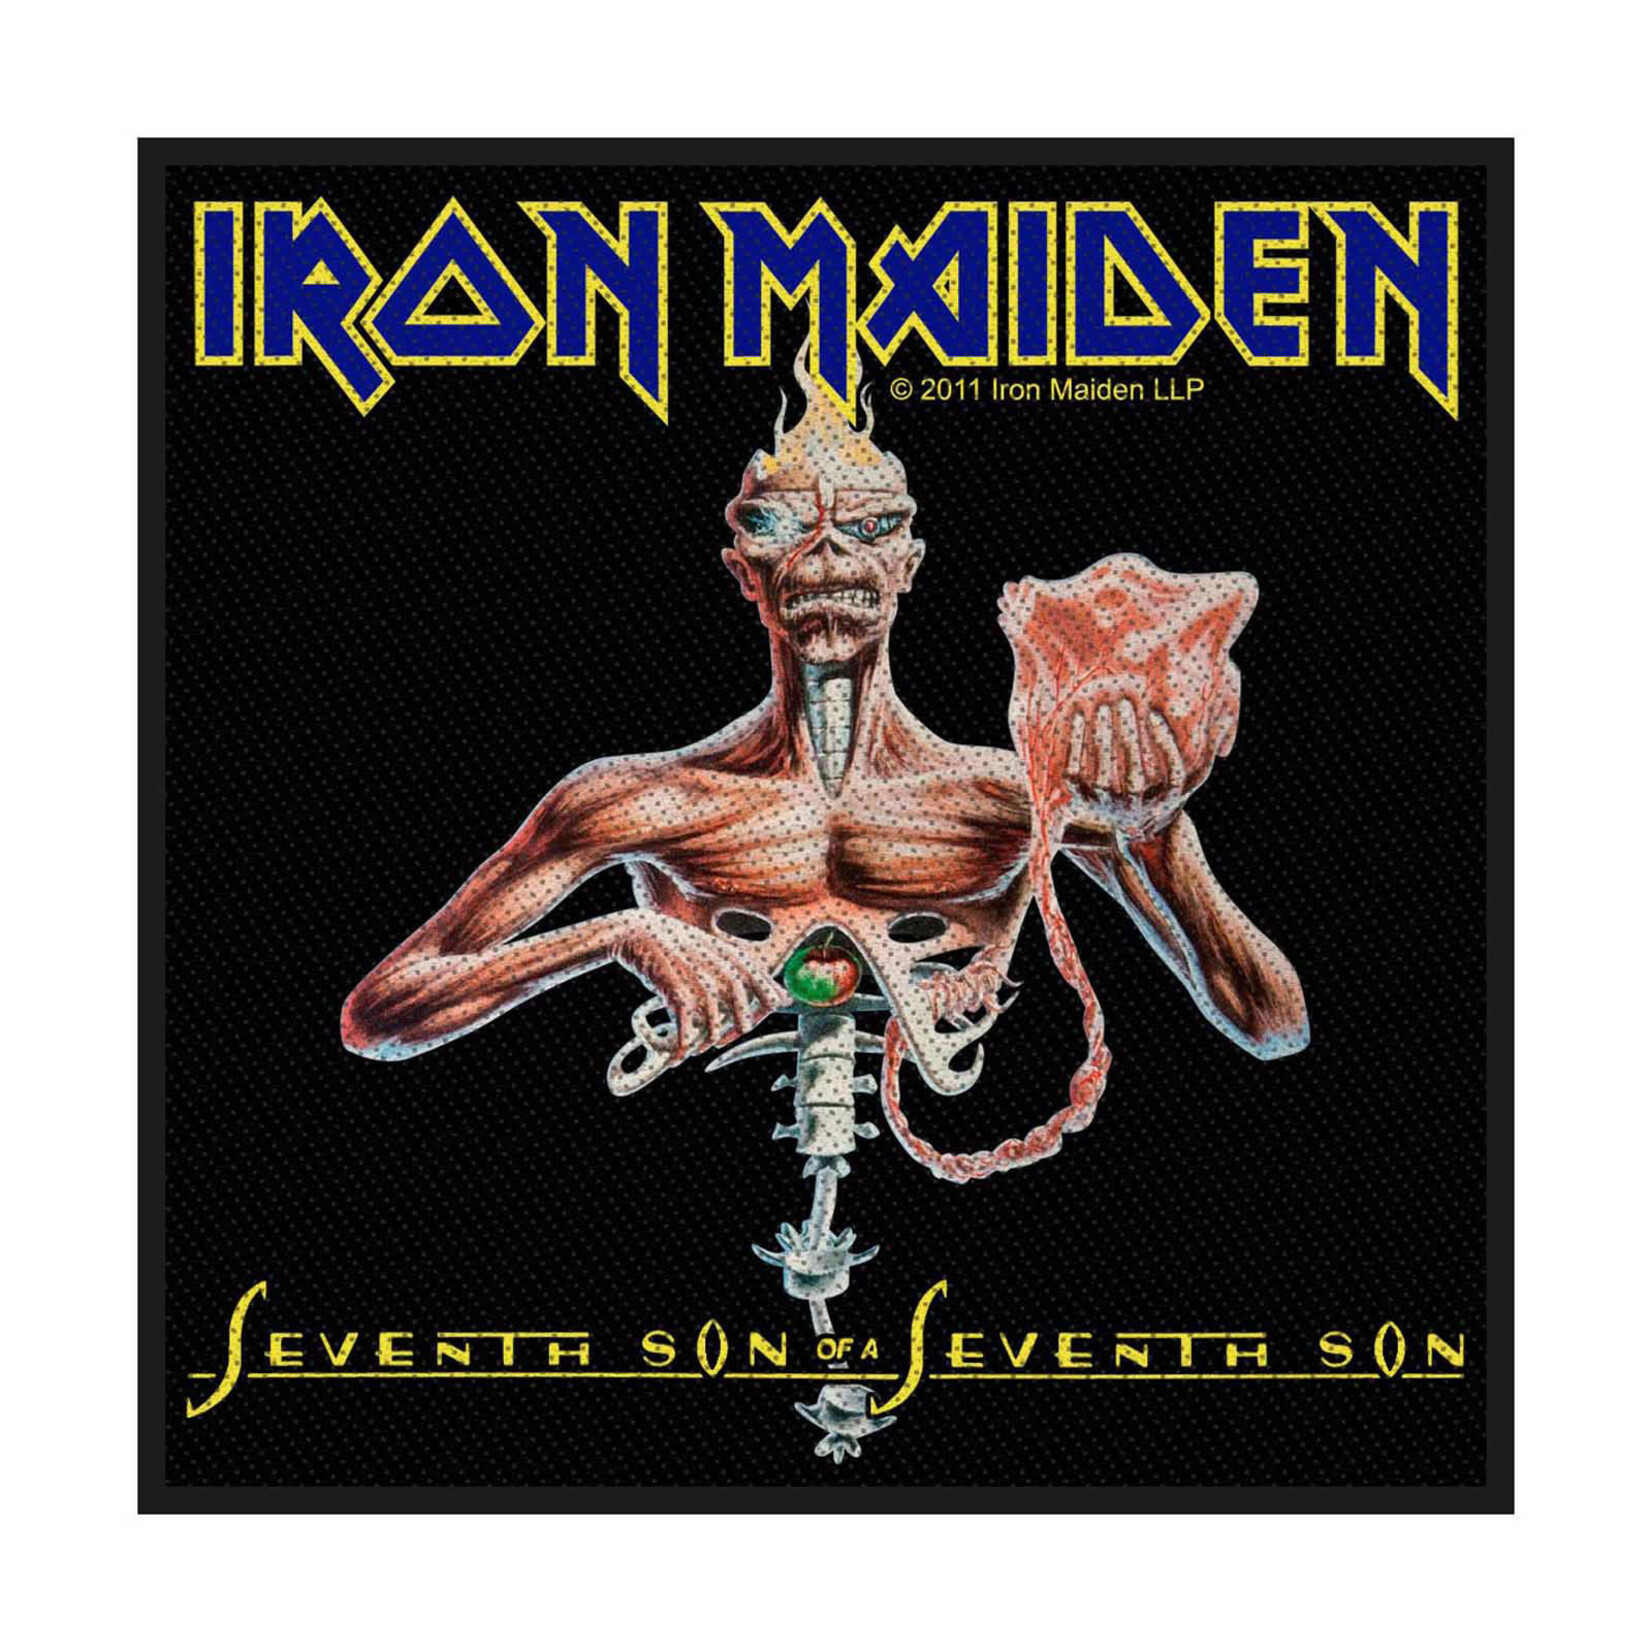 Patch - Iron Maiden: Seventh Son